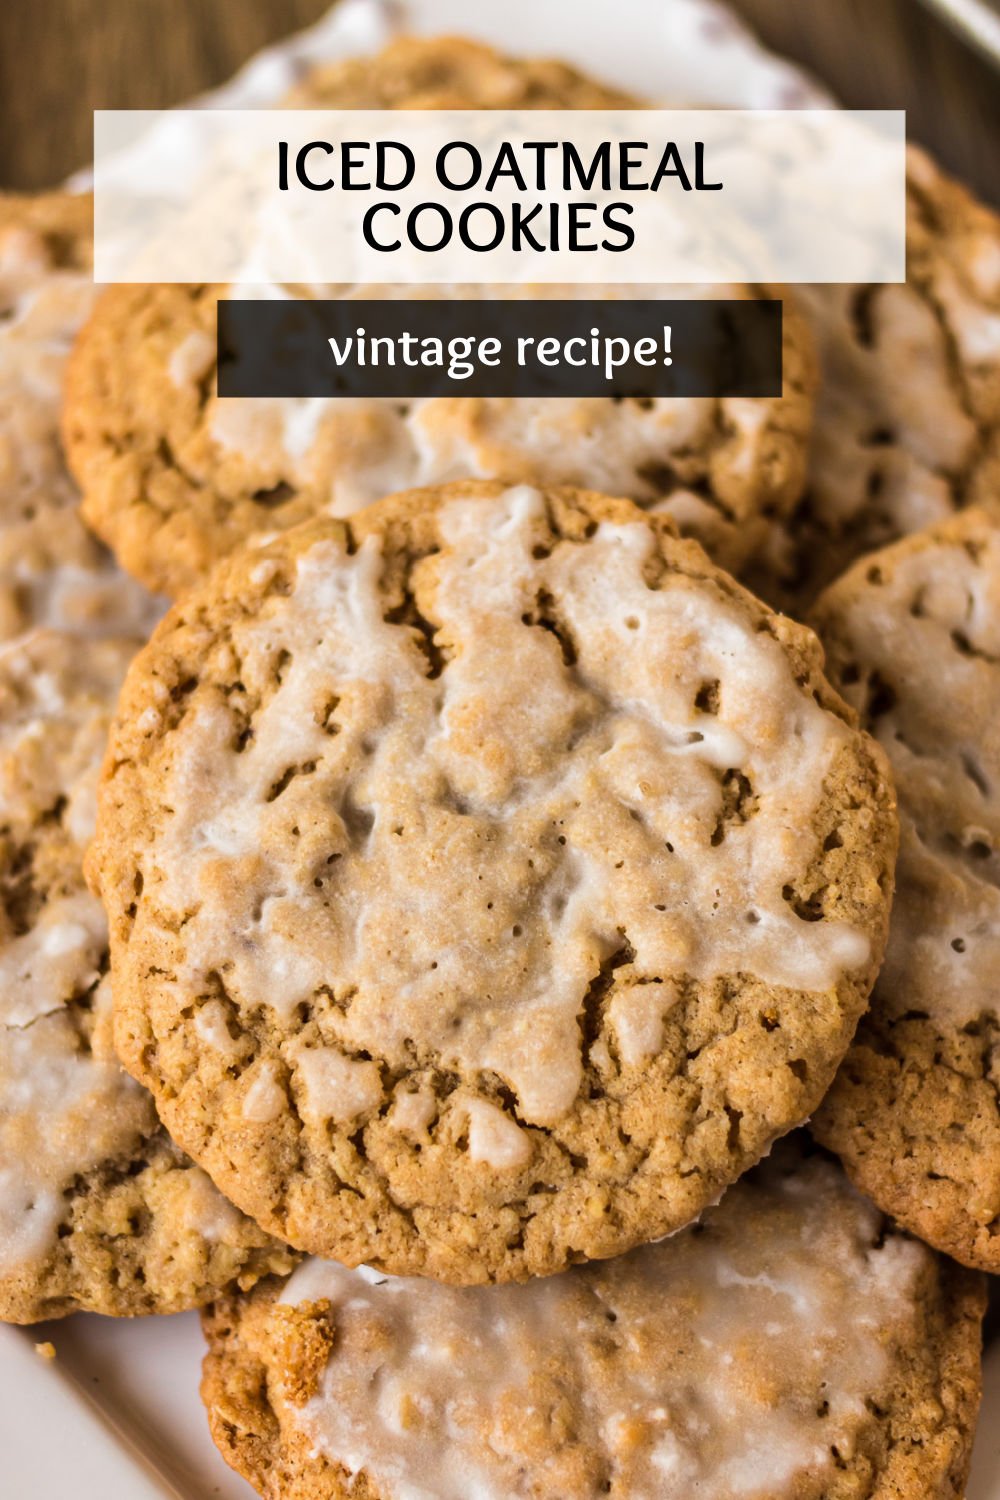 Old fashioned, soft and chewy, Iced Oatmeal Cookies! With a crisp edge and soft middle, this classic cookie is perfectly frosted with a simple icing and belongs in your regular baking rotation. | www.persnicketyplates.com